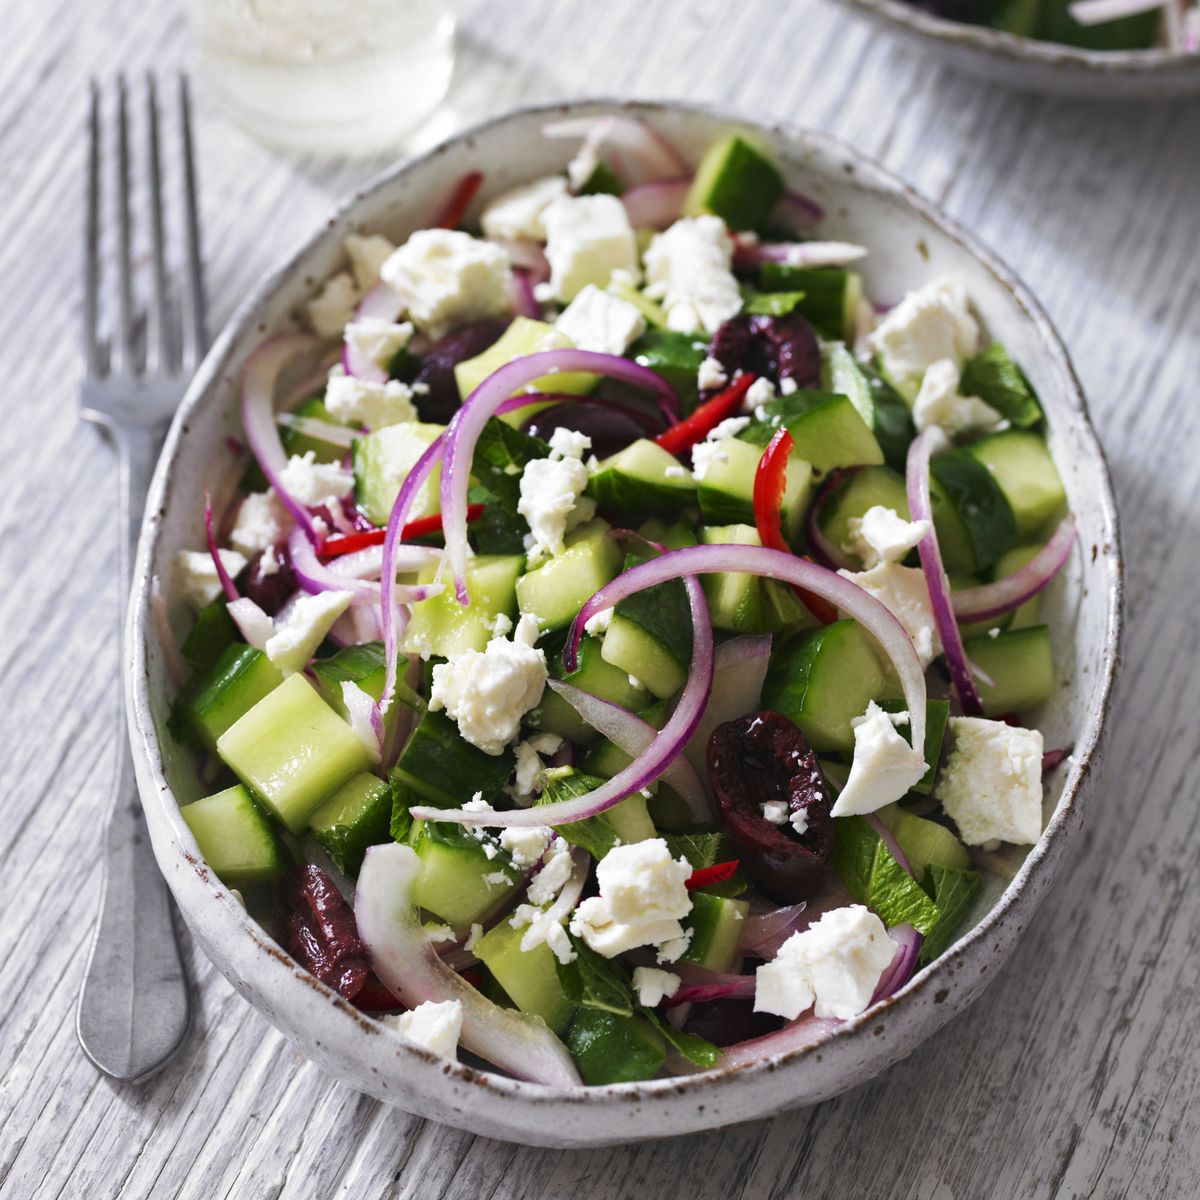 Cucumber Salad with Feta, Black Olives and Mint.